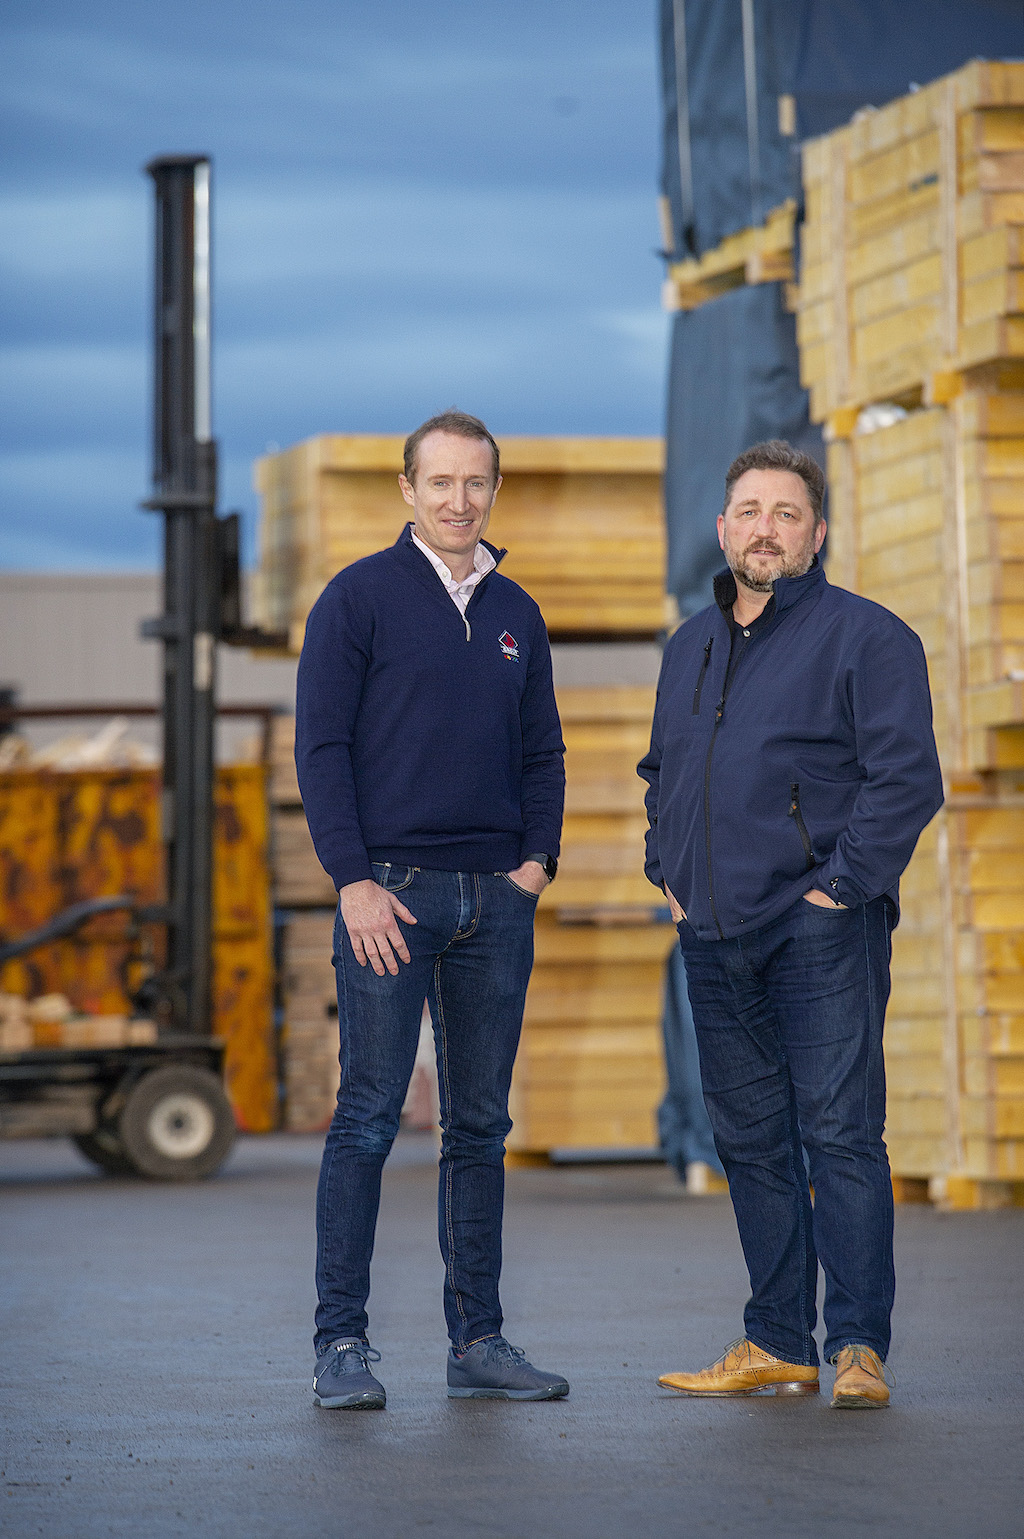 Donaldson Group acquires Stewart Milne Timber Systems